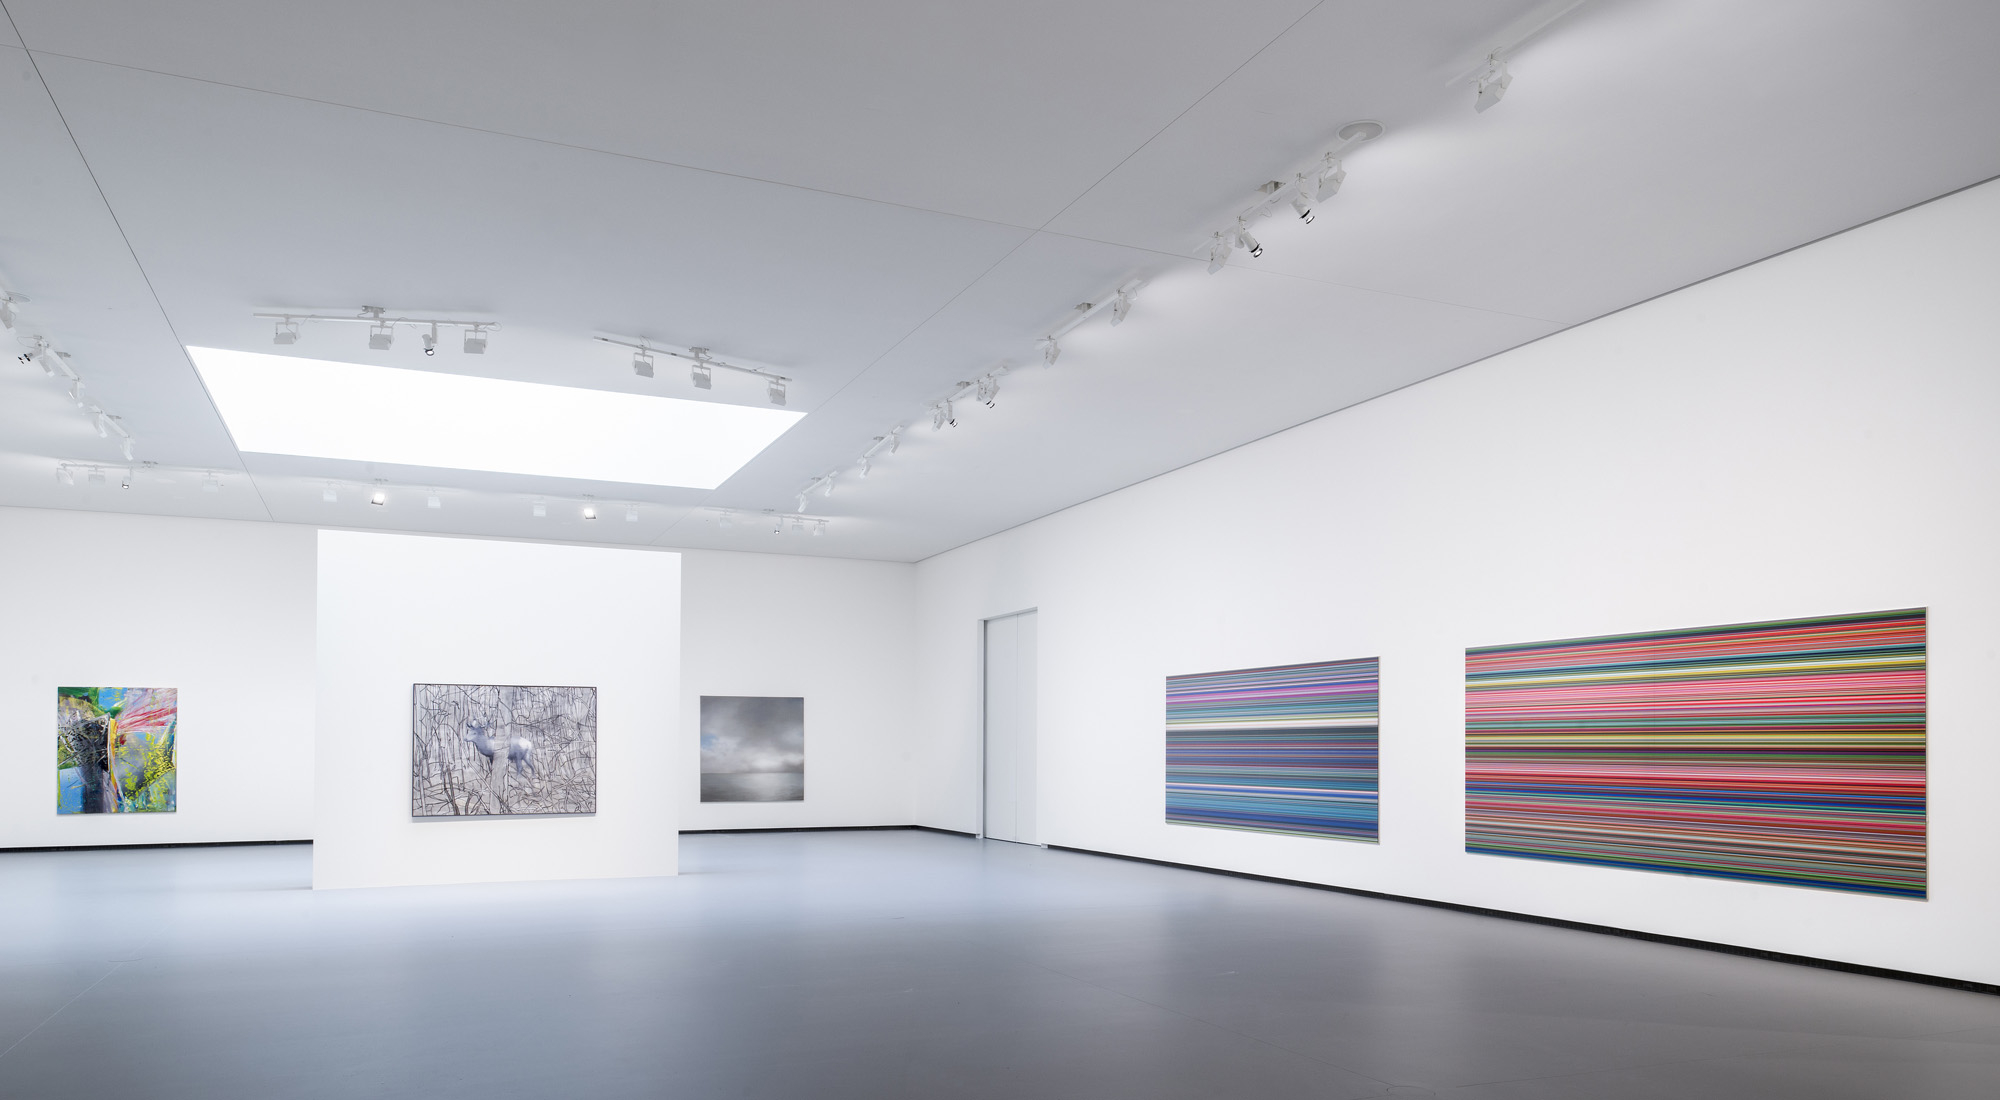 Korea JoongAng Daily : Espace Louis Vuitton Seoul welcomes Gerhard Richter  and his '4900 Colours' — Art 19